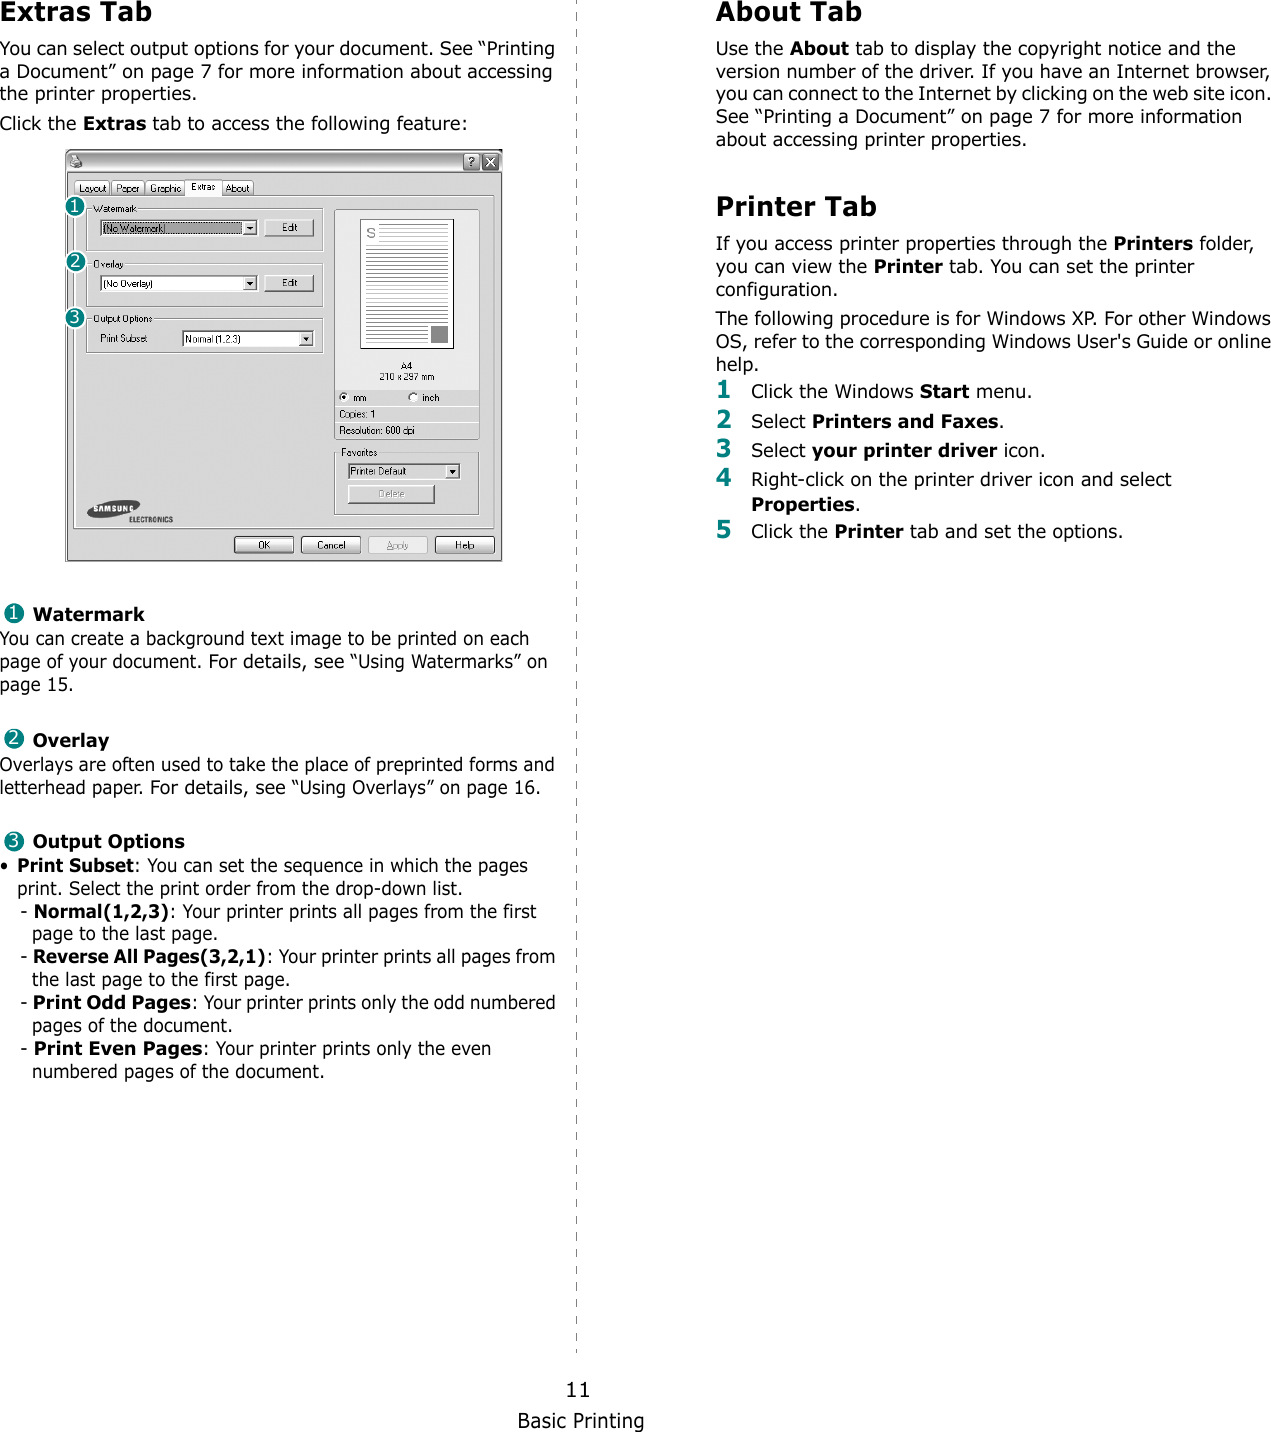 Basic Printing11Extras TabYou can select output options for your document. See “Printing a Document” on page 7 for more information about accessing the printer properties.Click the Extras tab to access the following feature:  WatermarkYou can create a background text image to be printed on each page of your document. For details, see “Using Watermarks” on page 15.OverlayOverlays are often used to take the place of preprinted forms and letterhead paper. For details, see “Using Overlays” on page 16.Output Options•Print Subset: You can set the sequence in which the pages print. Select the print order from the drop-down list.- Normal(1,2,3): Your printer prints all pages from the first page to the last page.- Reverse All Pages(3,2,1): Your printer prints all pages from the last page to the first page.- Print Odd Pages: Your printer prints only the odd numbered pages of the document.- Print Even Pages: Your printer prints only the even numbered pages of the document.123123About TabUse the About tab to display the copyright notice and the version number of the driver. If you have an Internet browser, you can connect to the Internet by clicking on the web site icon. See “Printing a Document” on page 7 for more information about accessing printer properties.Printer TabIf you access printer properties through the Printers folder, you can view the Printer tab. You can set the printer configuration.The following procedure is for Windows XP. For other Windows OS, refer to the corresponding Windows User&apos;s Guide or online help.1Click the Windows Start menu. 2Select Printers and Faxes.3Select your printer driver icon. 4Right-click on the printer driver icon and select Properties.5Click the Printer tab and set the options.  